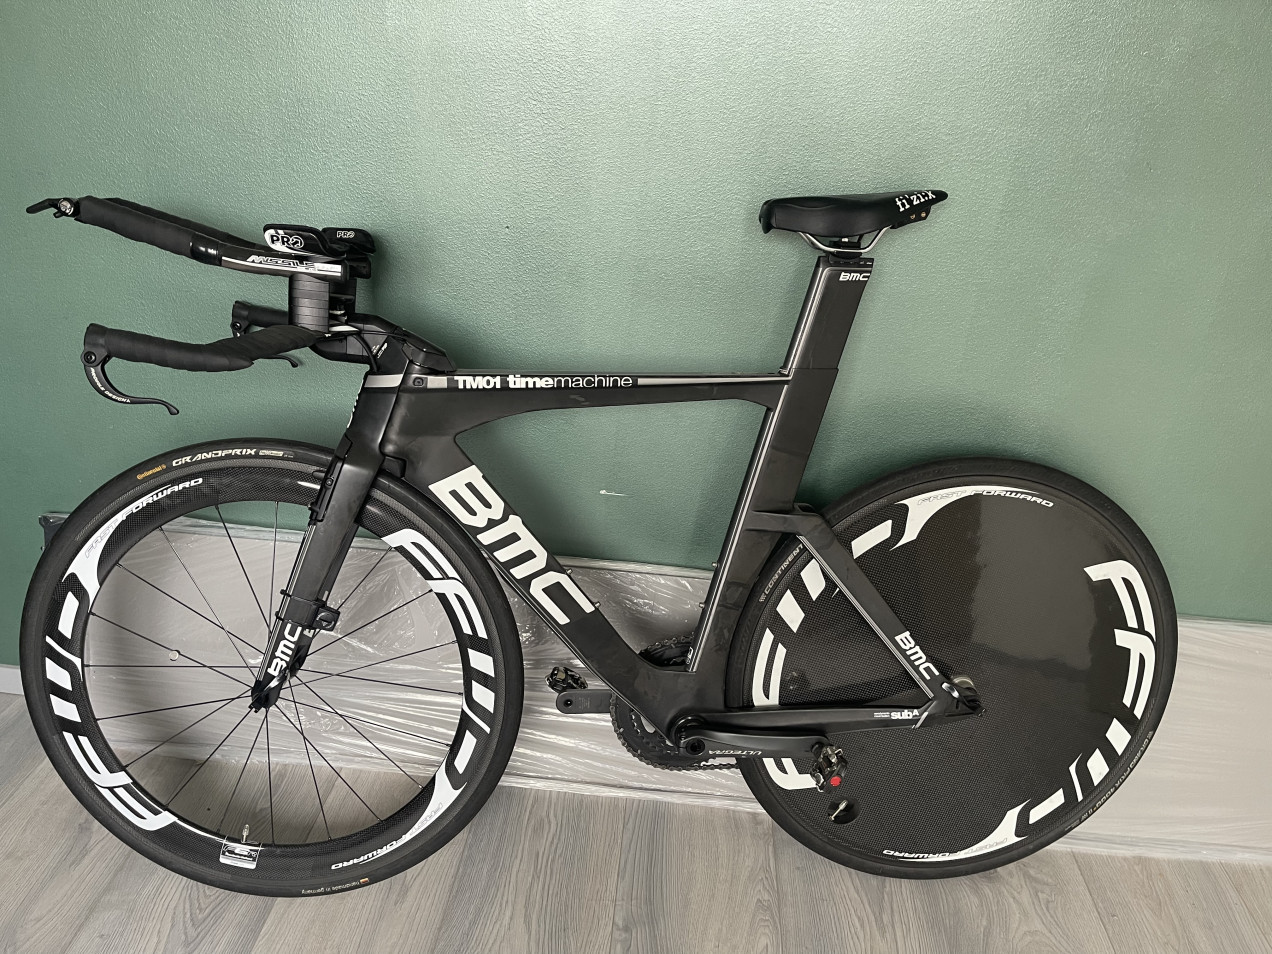 BMC timemachine TM01 Ultegra used in m | buycycle